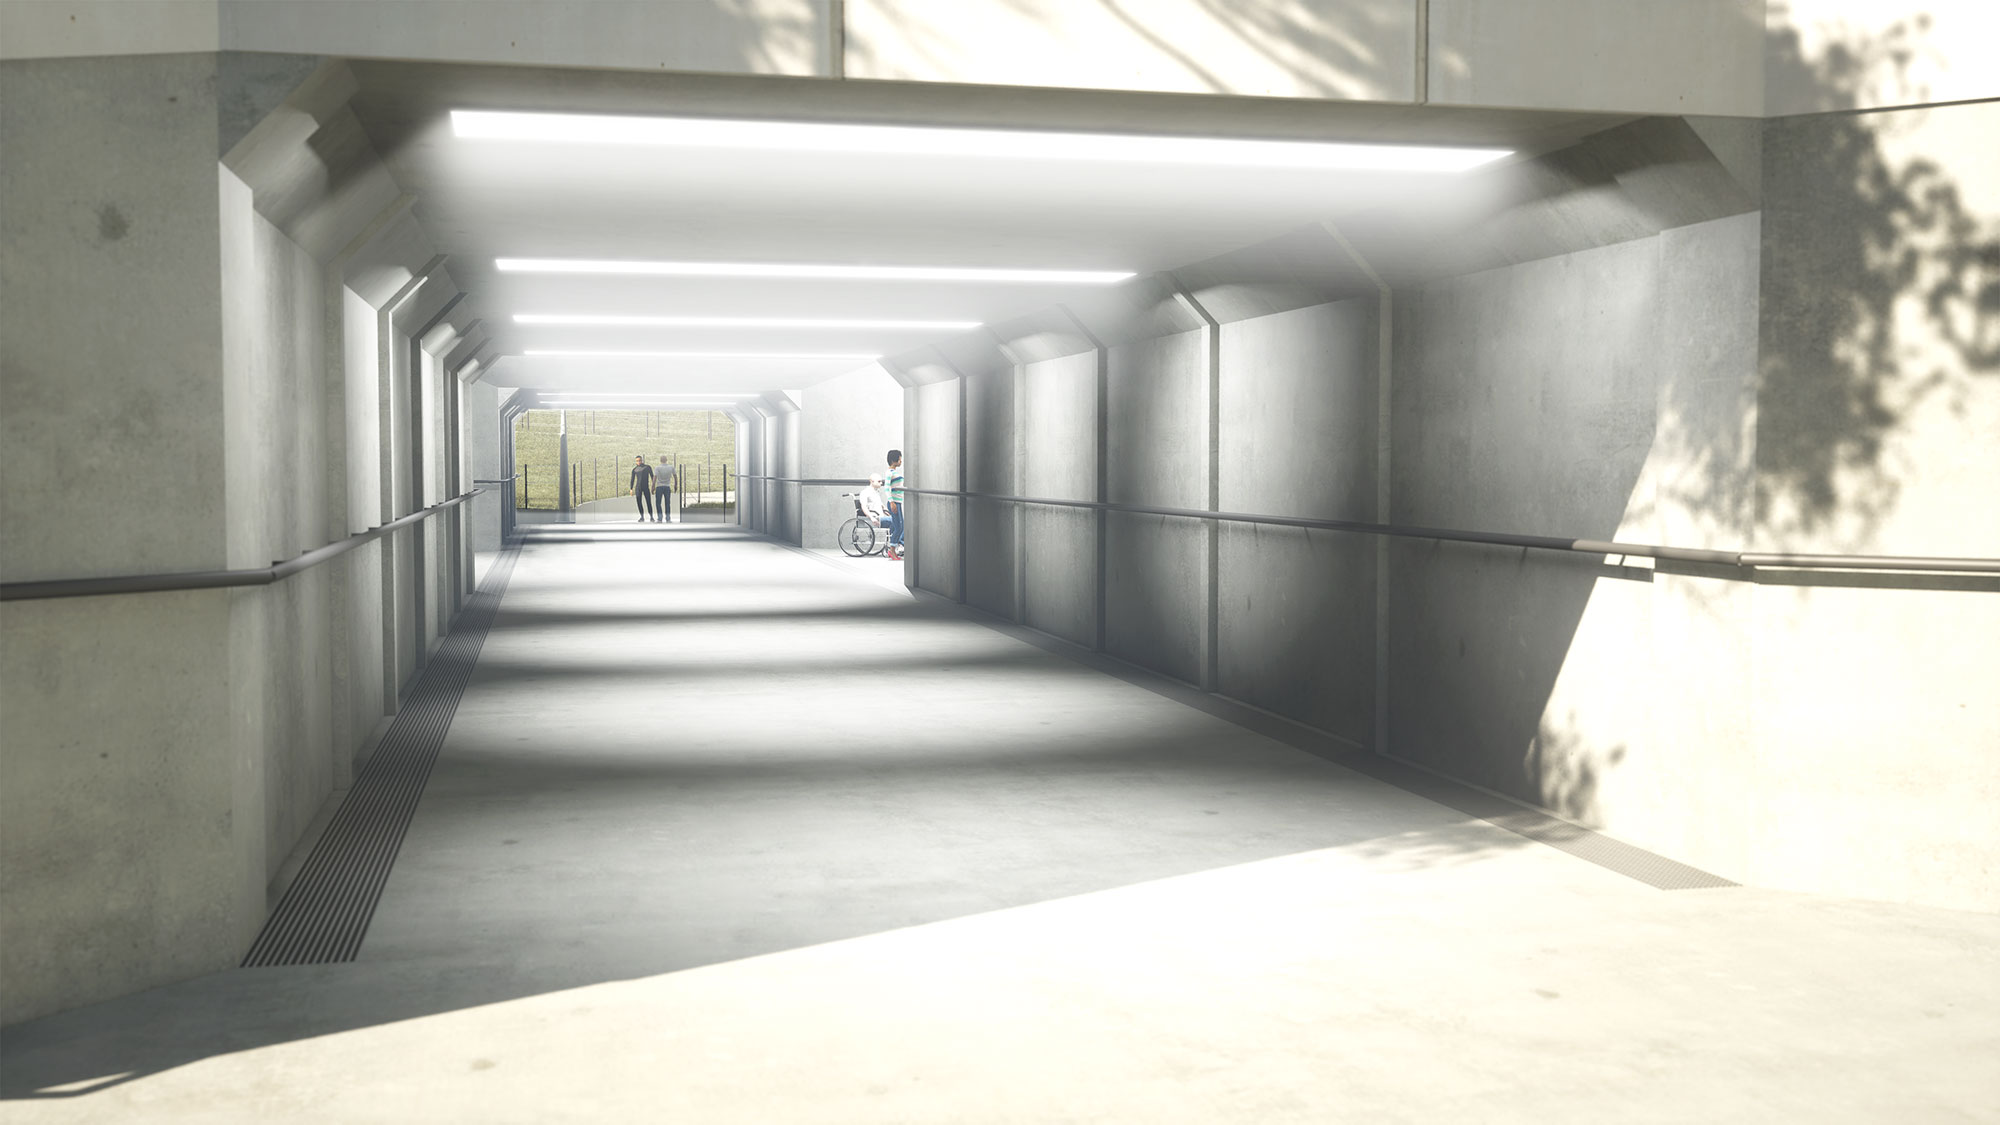 Visualisation of the new light and bright pedestrian underpass with lifts, ramps and stairs